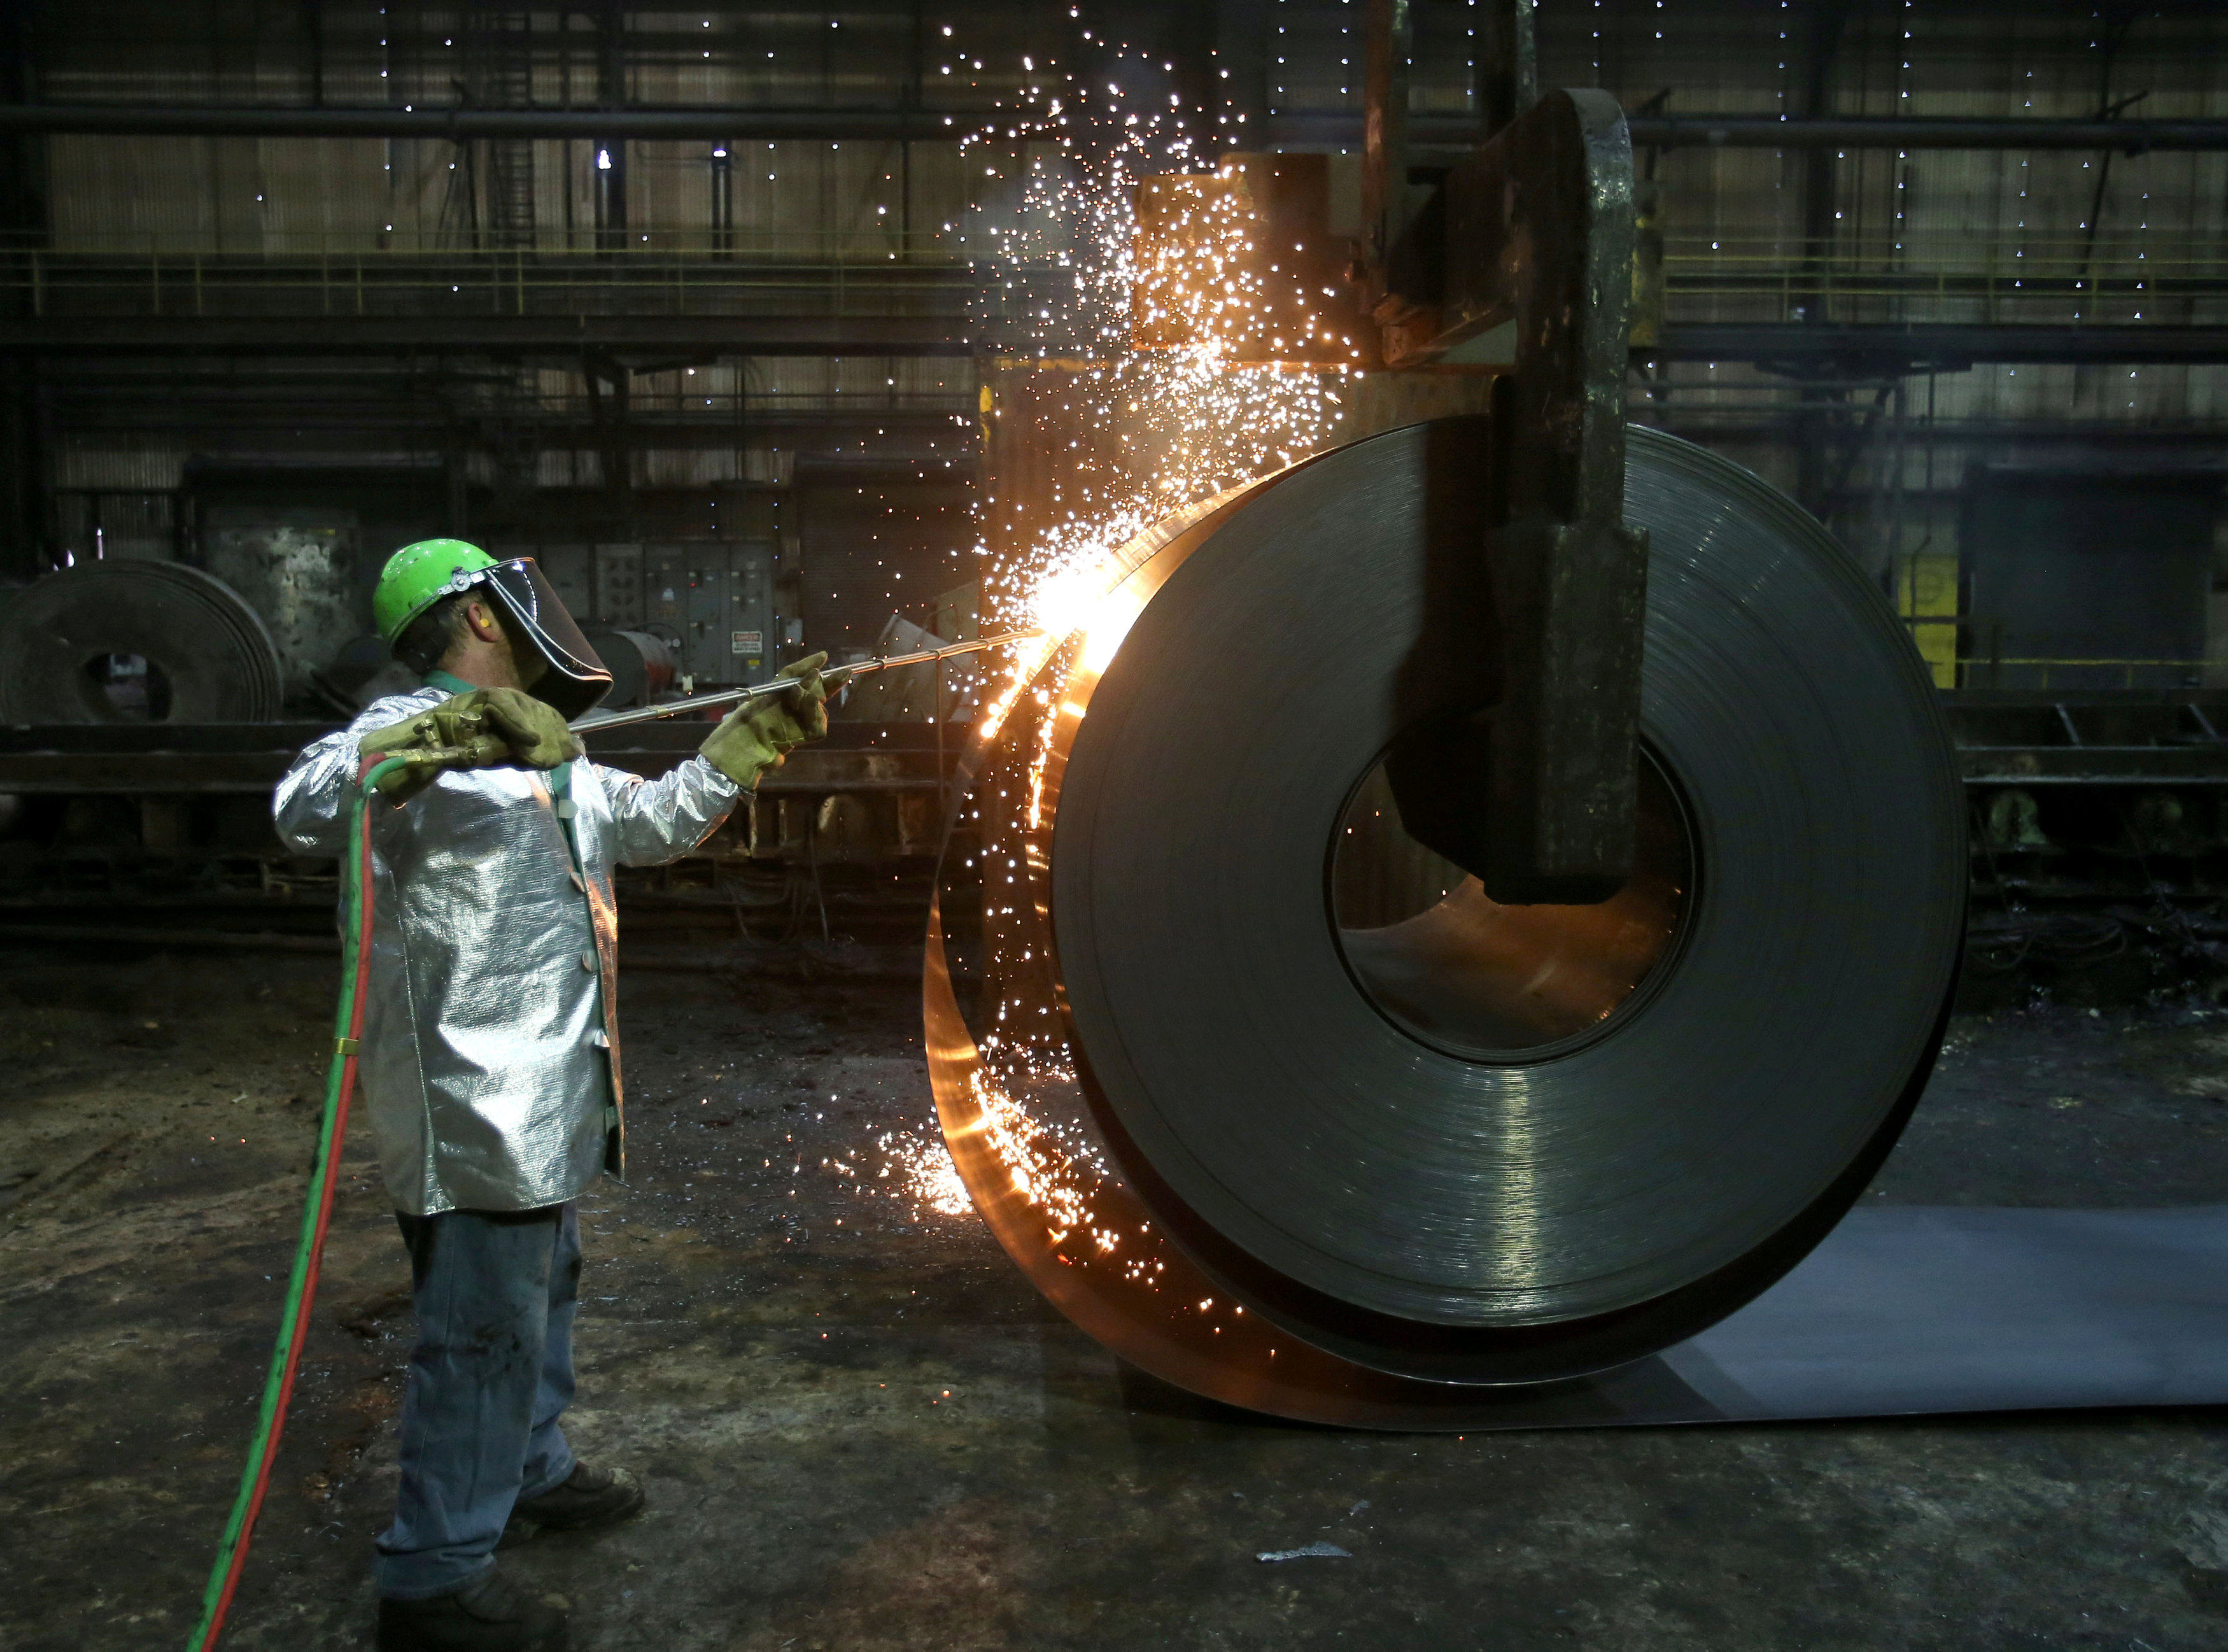 The World Trade Organization has said US tariffs on steel and aluminium violate international trade rules, but Washington rejected the assessment. Photo: Reuters